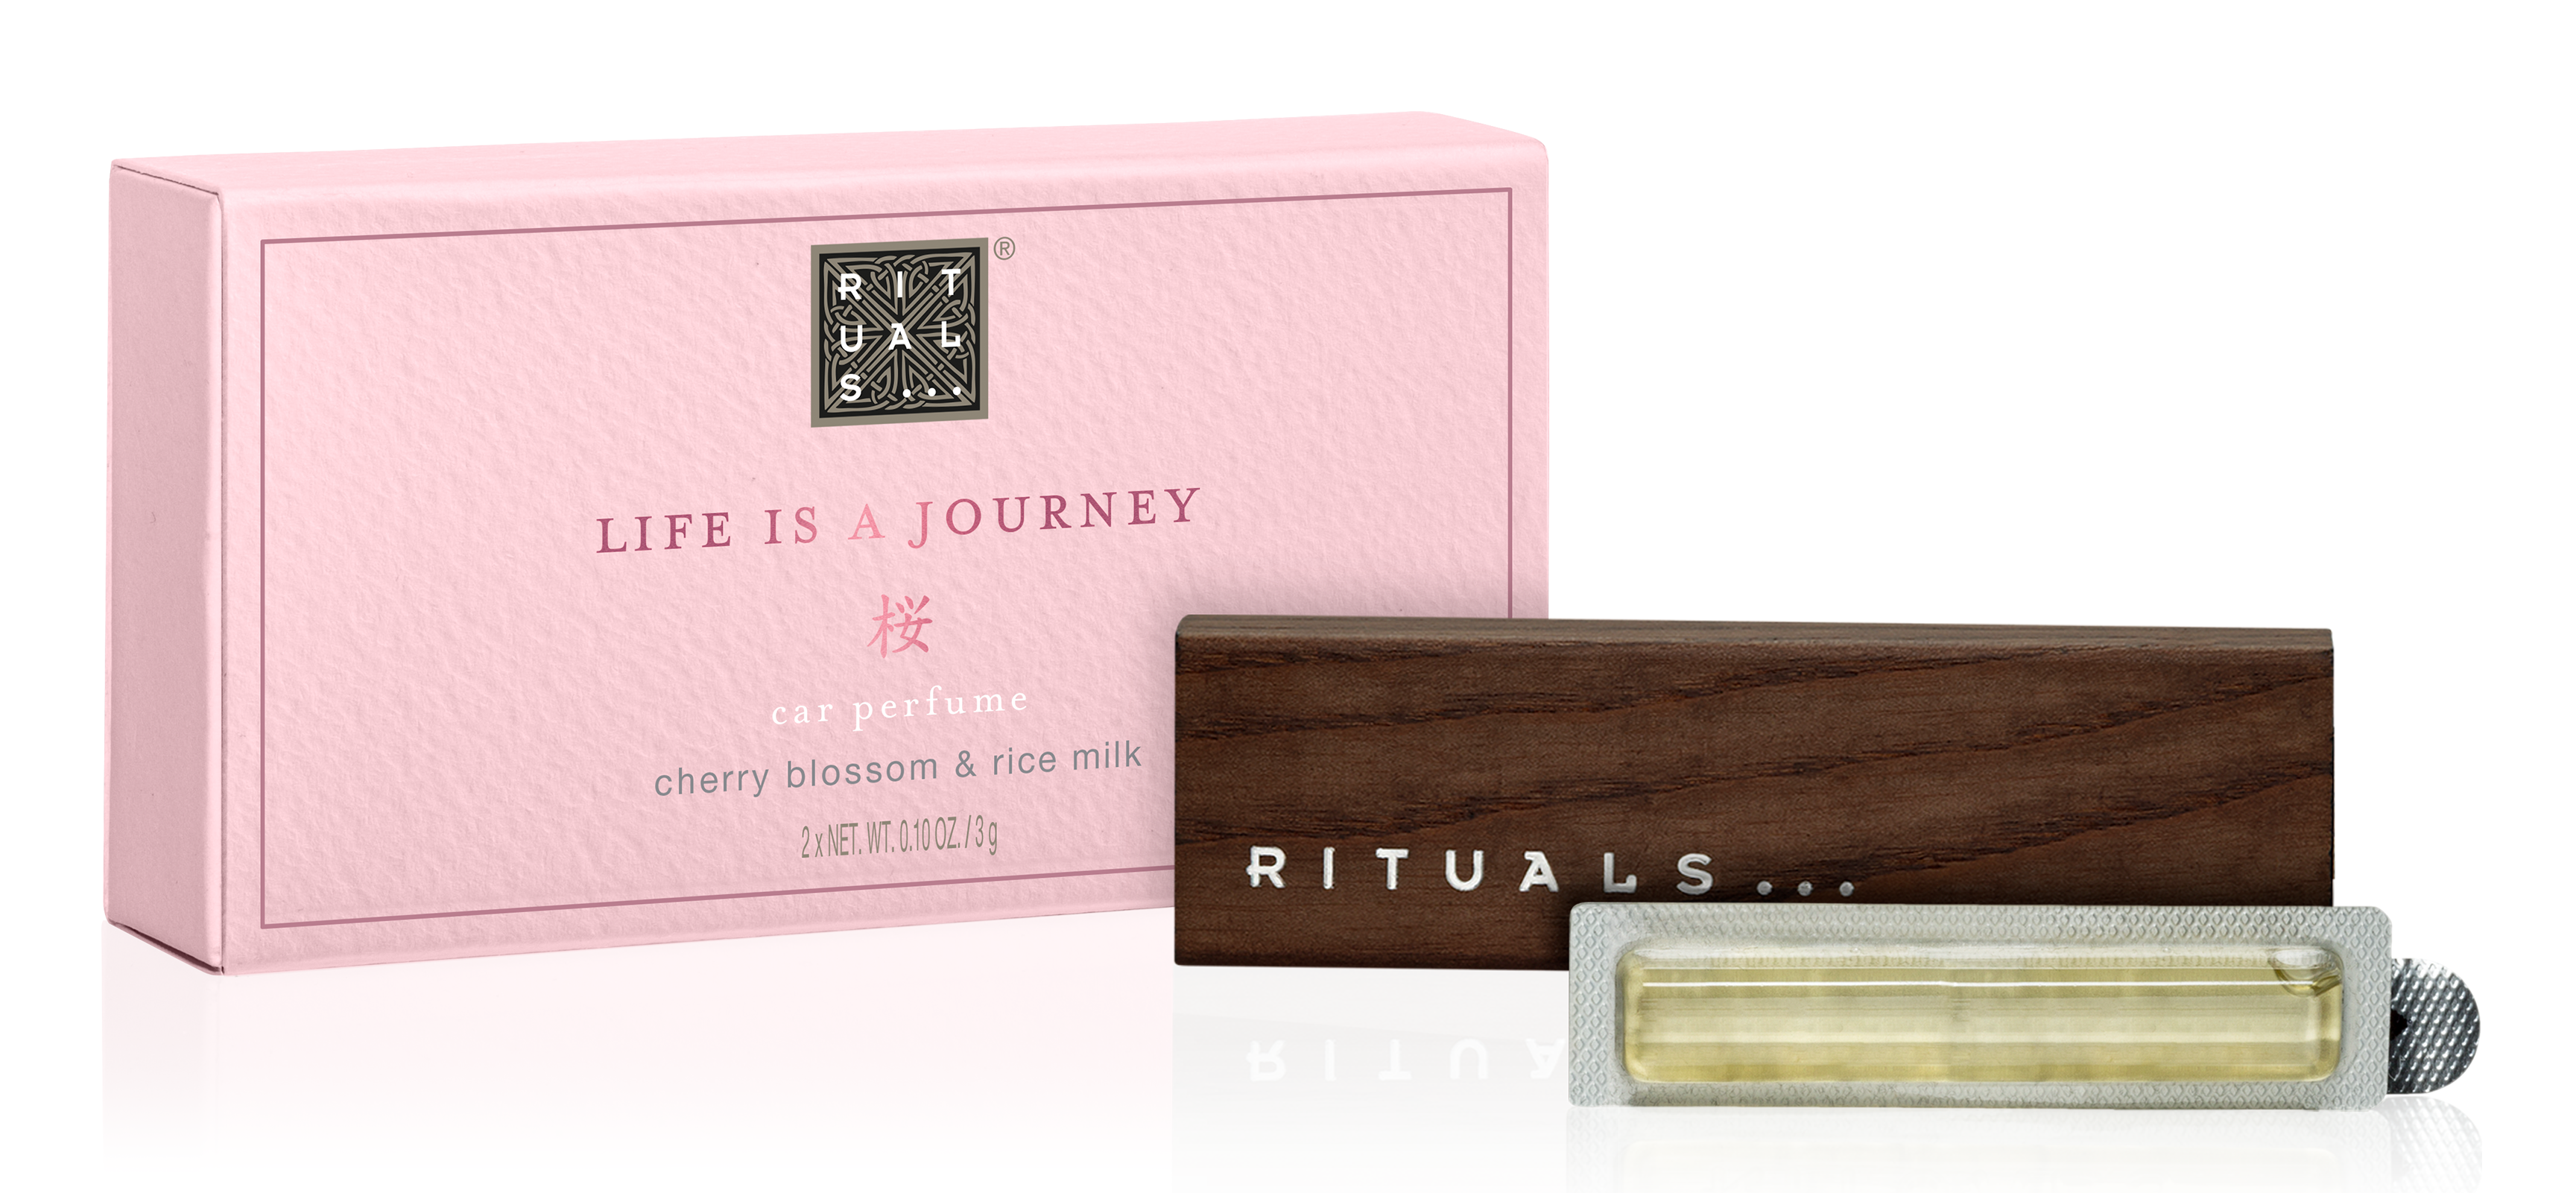 https://lyko.com/globalassets/product-images/rituals-life-is-a-journey-car-perfume-6-g-1808-768-0006_1.png?ref=F44FBE9B47